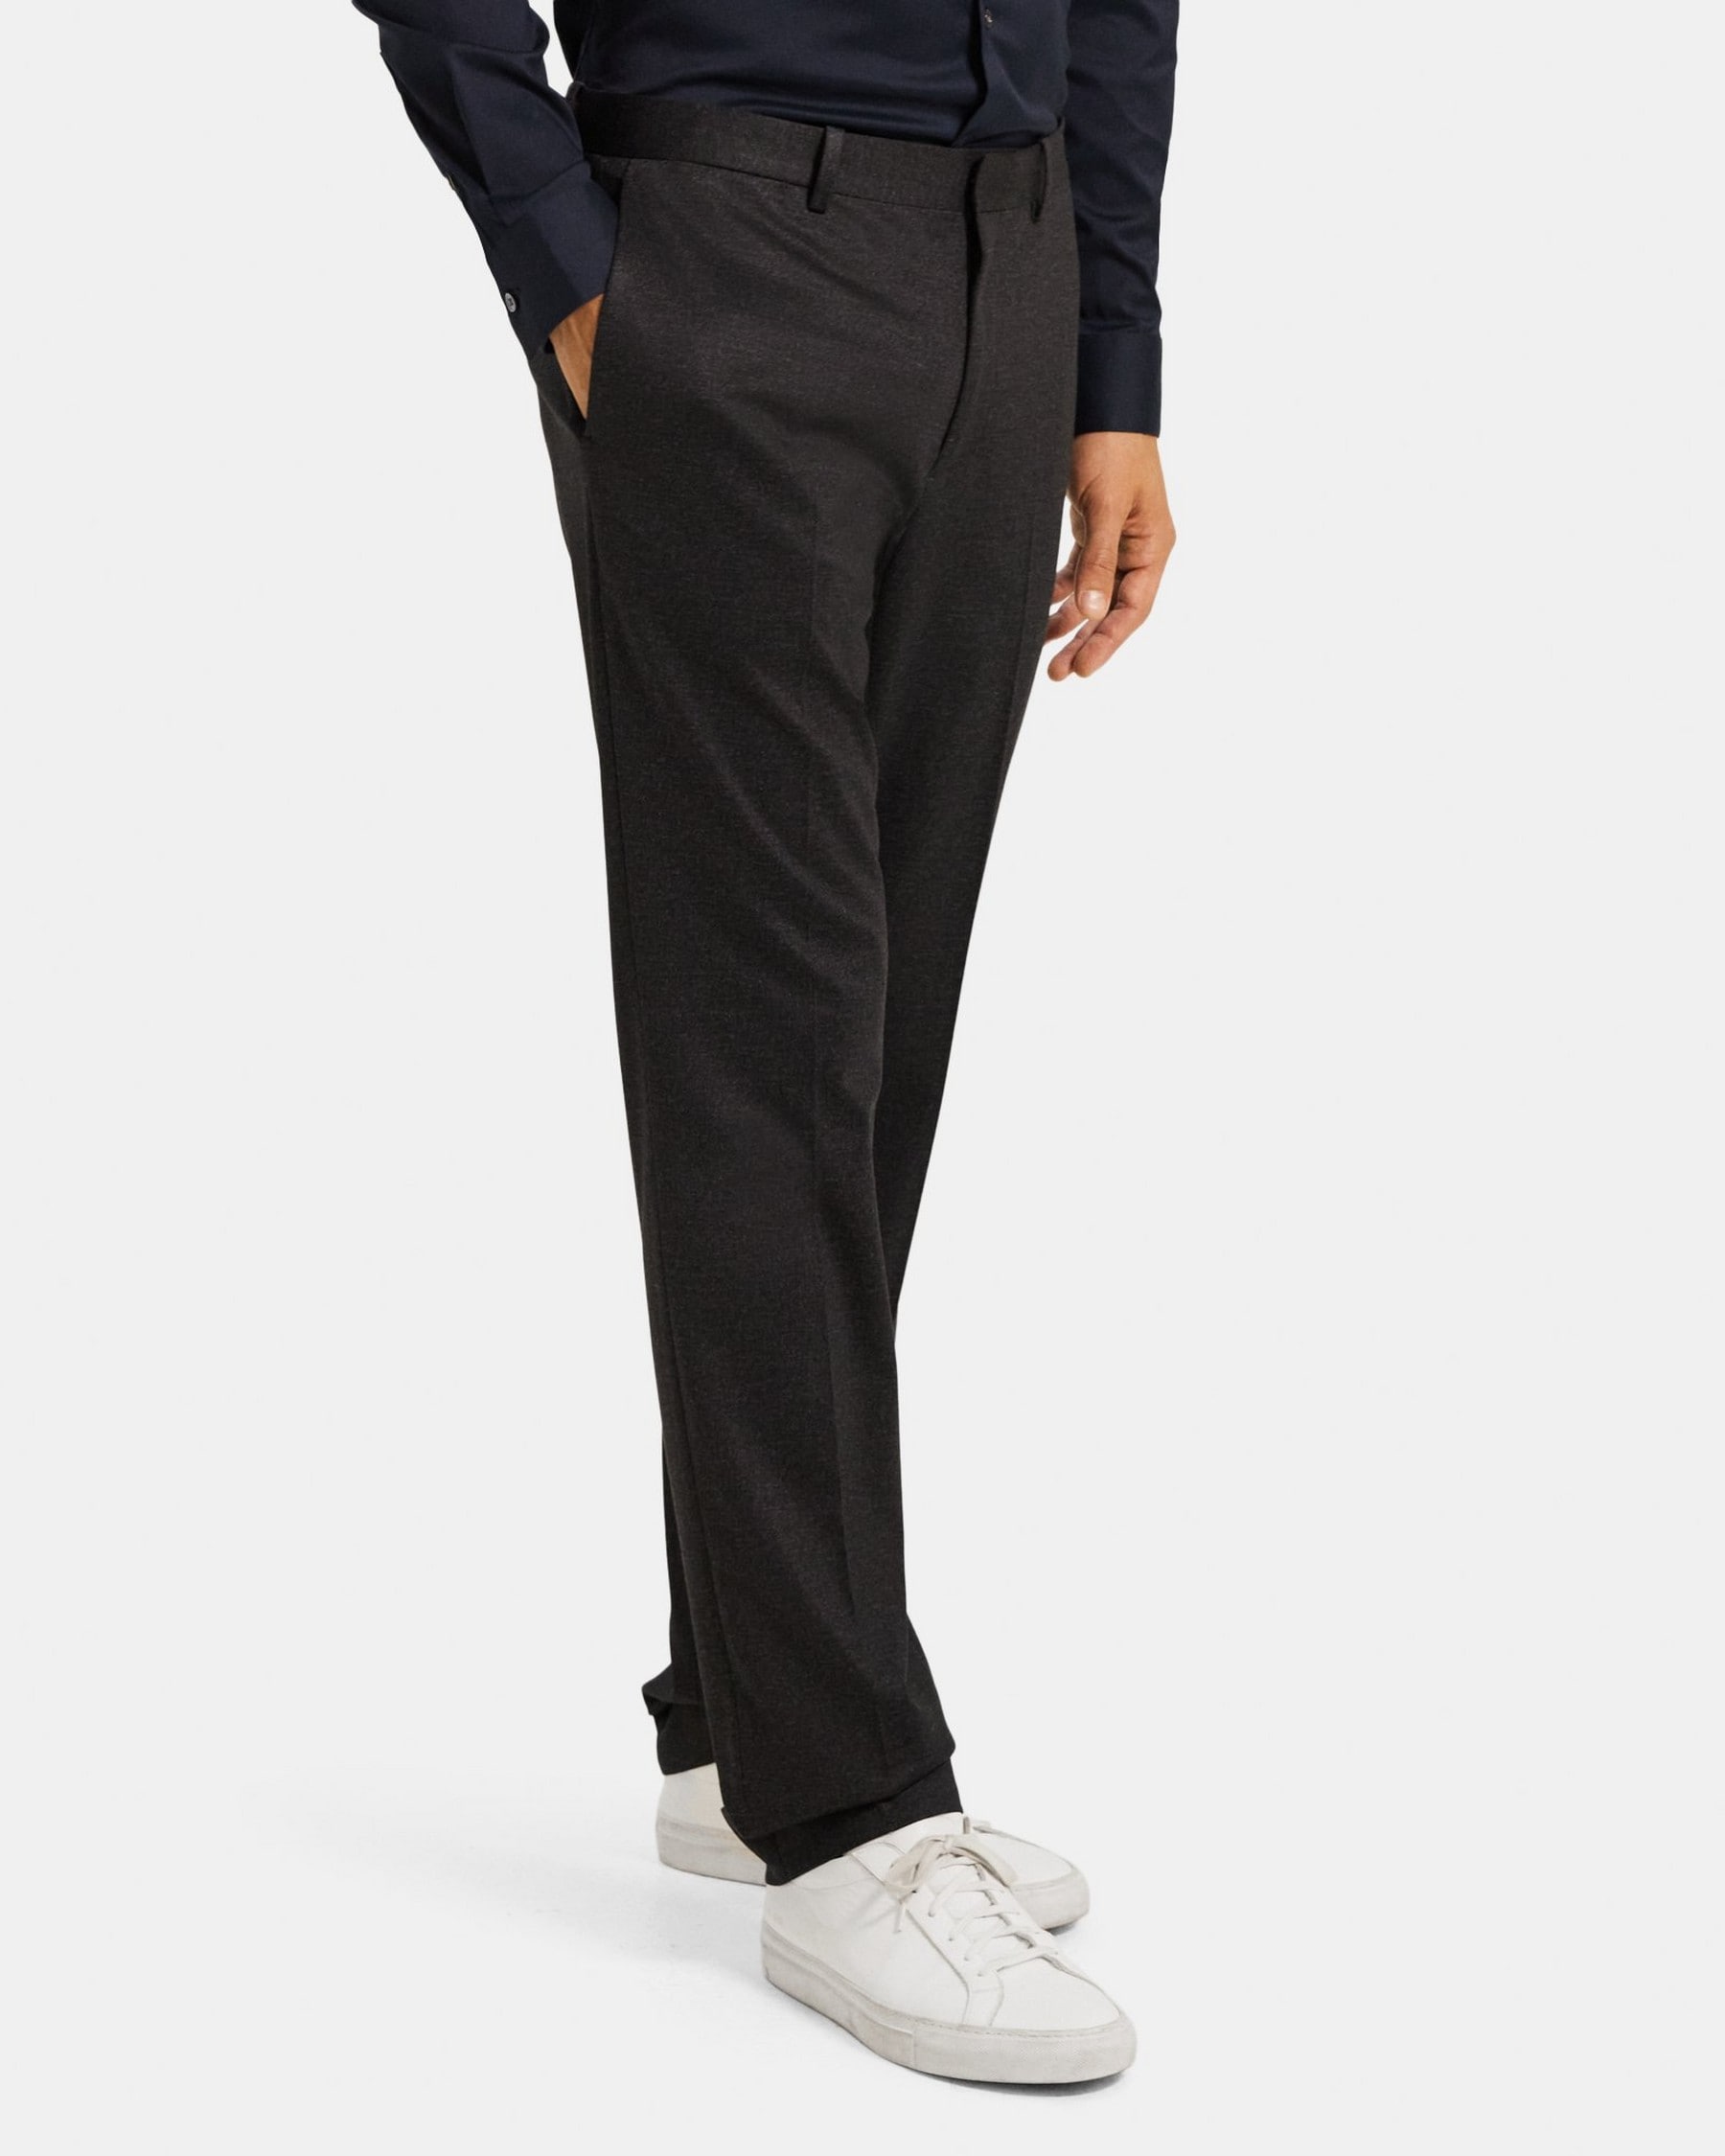 Slim-Fit Suit Pant in Knit Twill